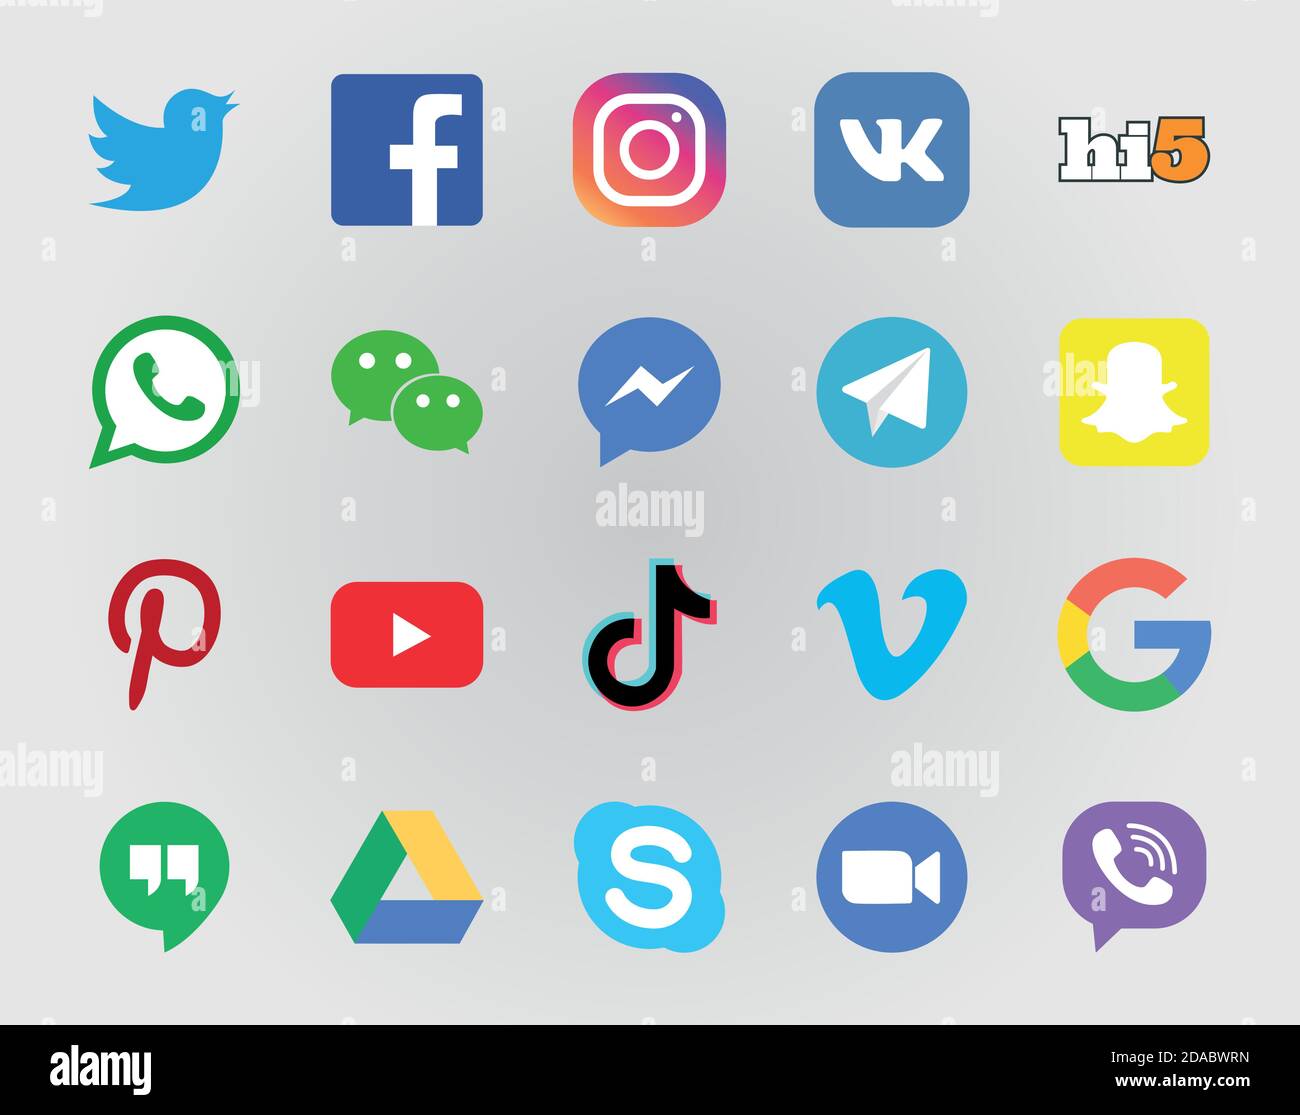 social networks and instant messaging logo icon set over gray background, flat style, vector illustration Stock Vector